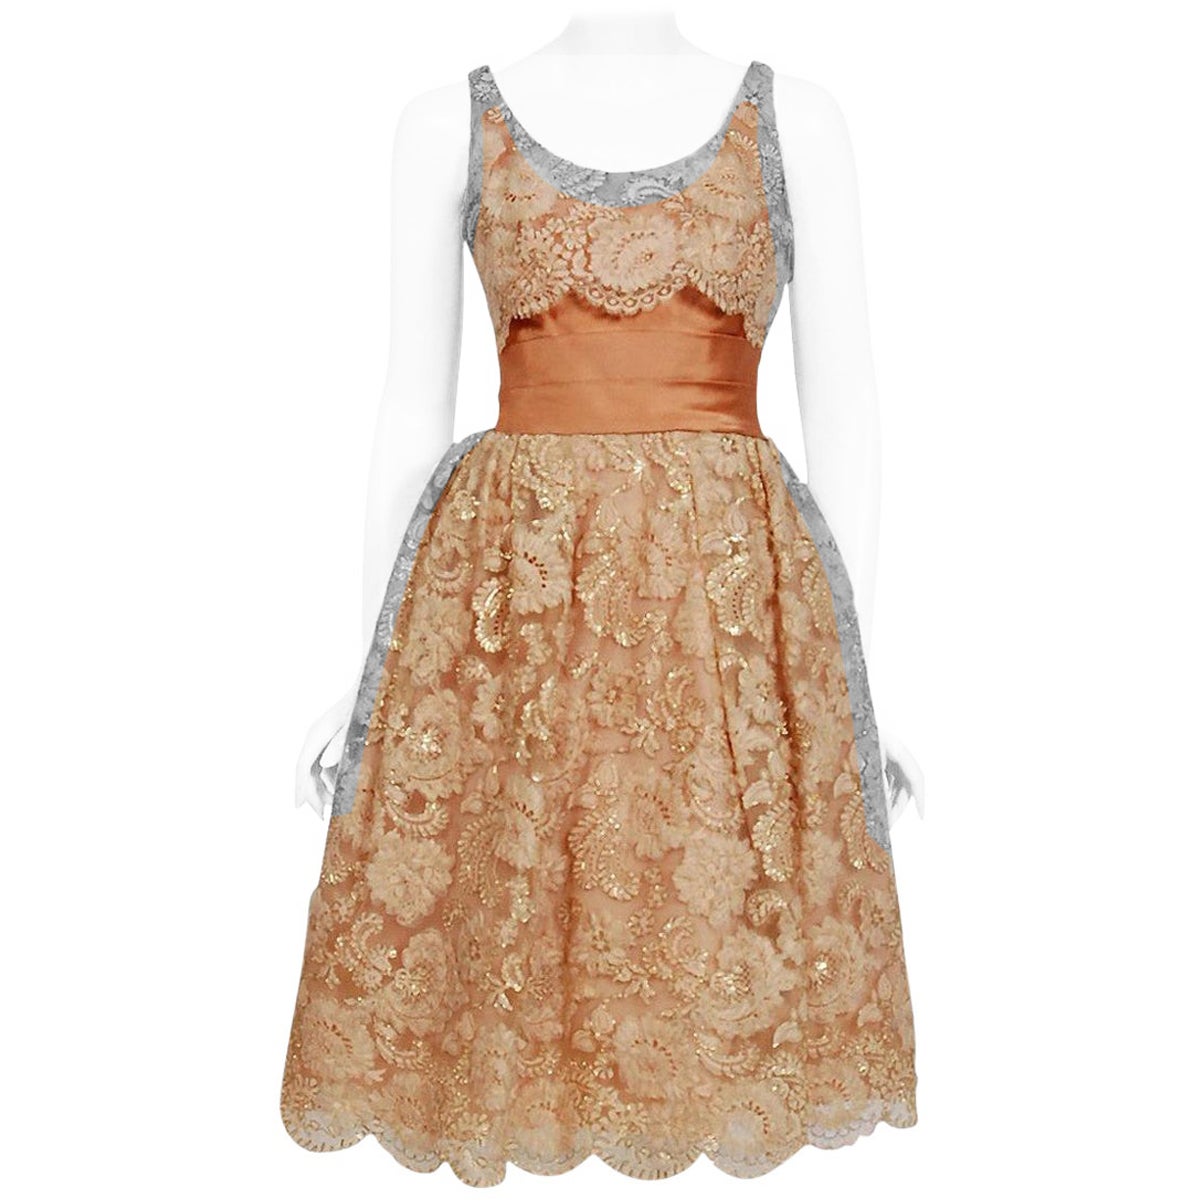 Vintage 1950's Rudolf Couture Metallic Peach Lace & Satin Scalloped Party Dress For Sale